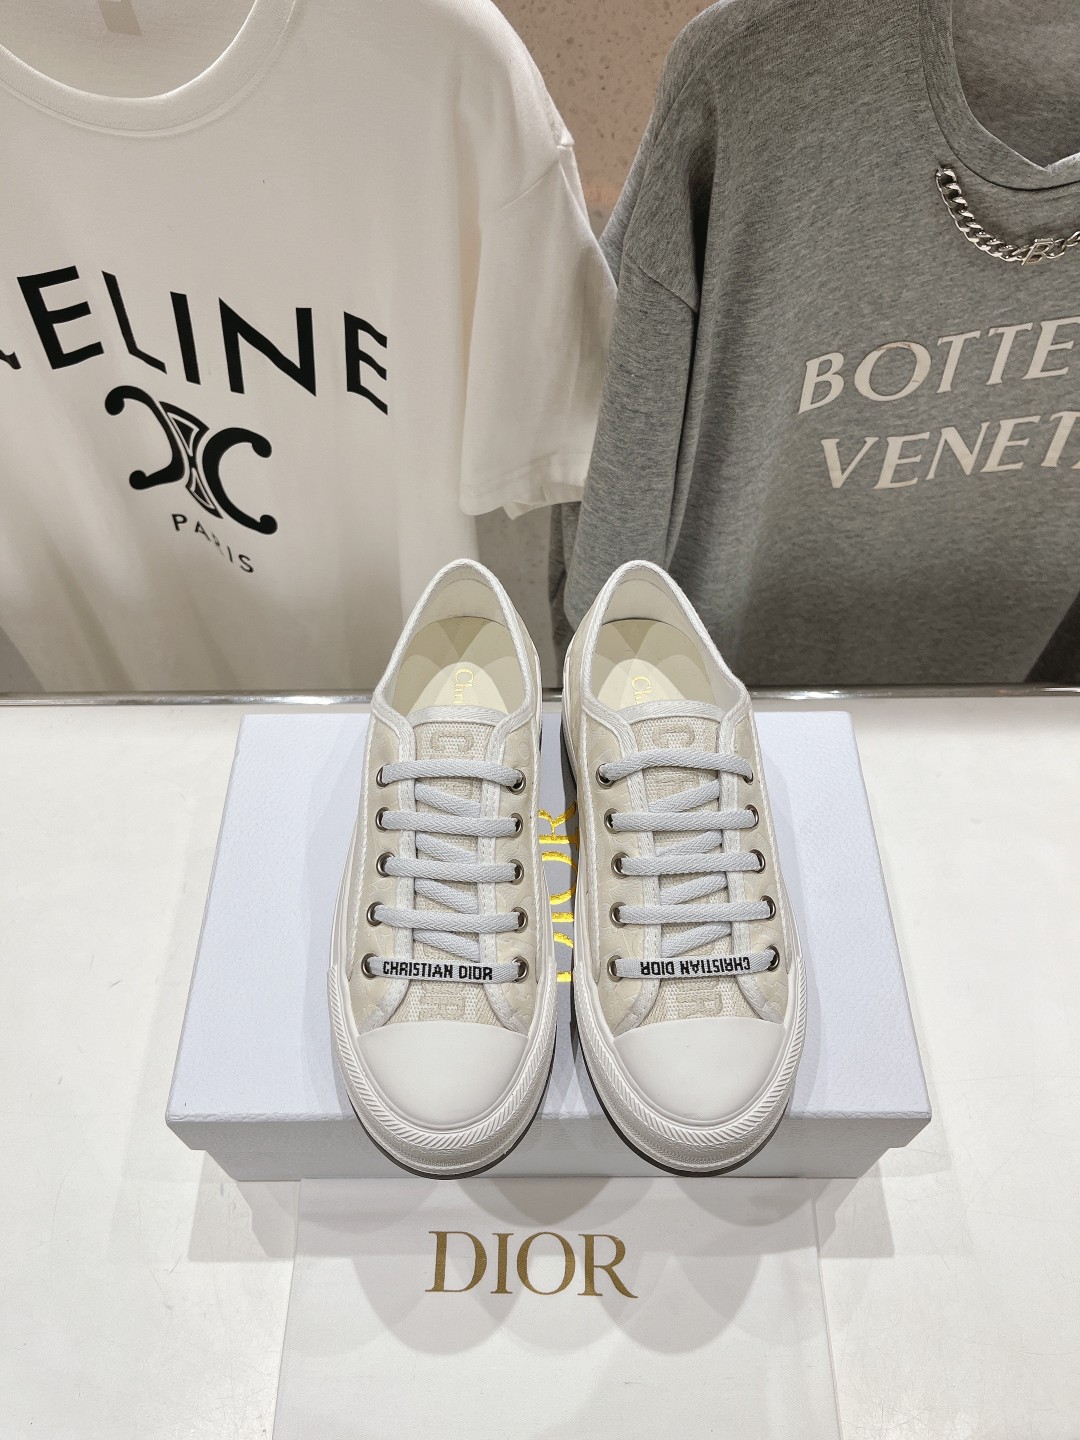 Dior Sneakers Canvas Shoes Casual Shoes Embroidery Canvas Cotton PU Sheepskin TPU Oblique Casual